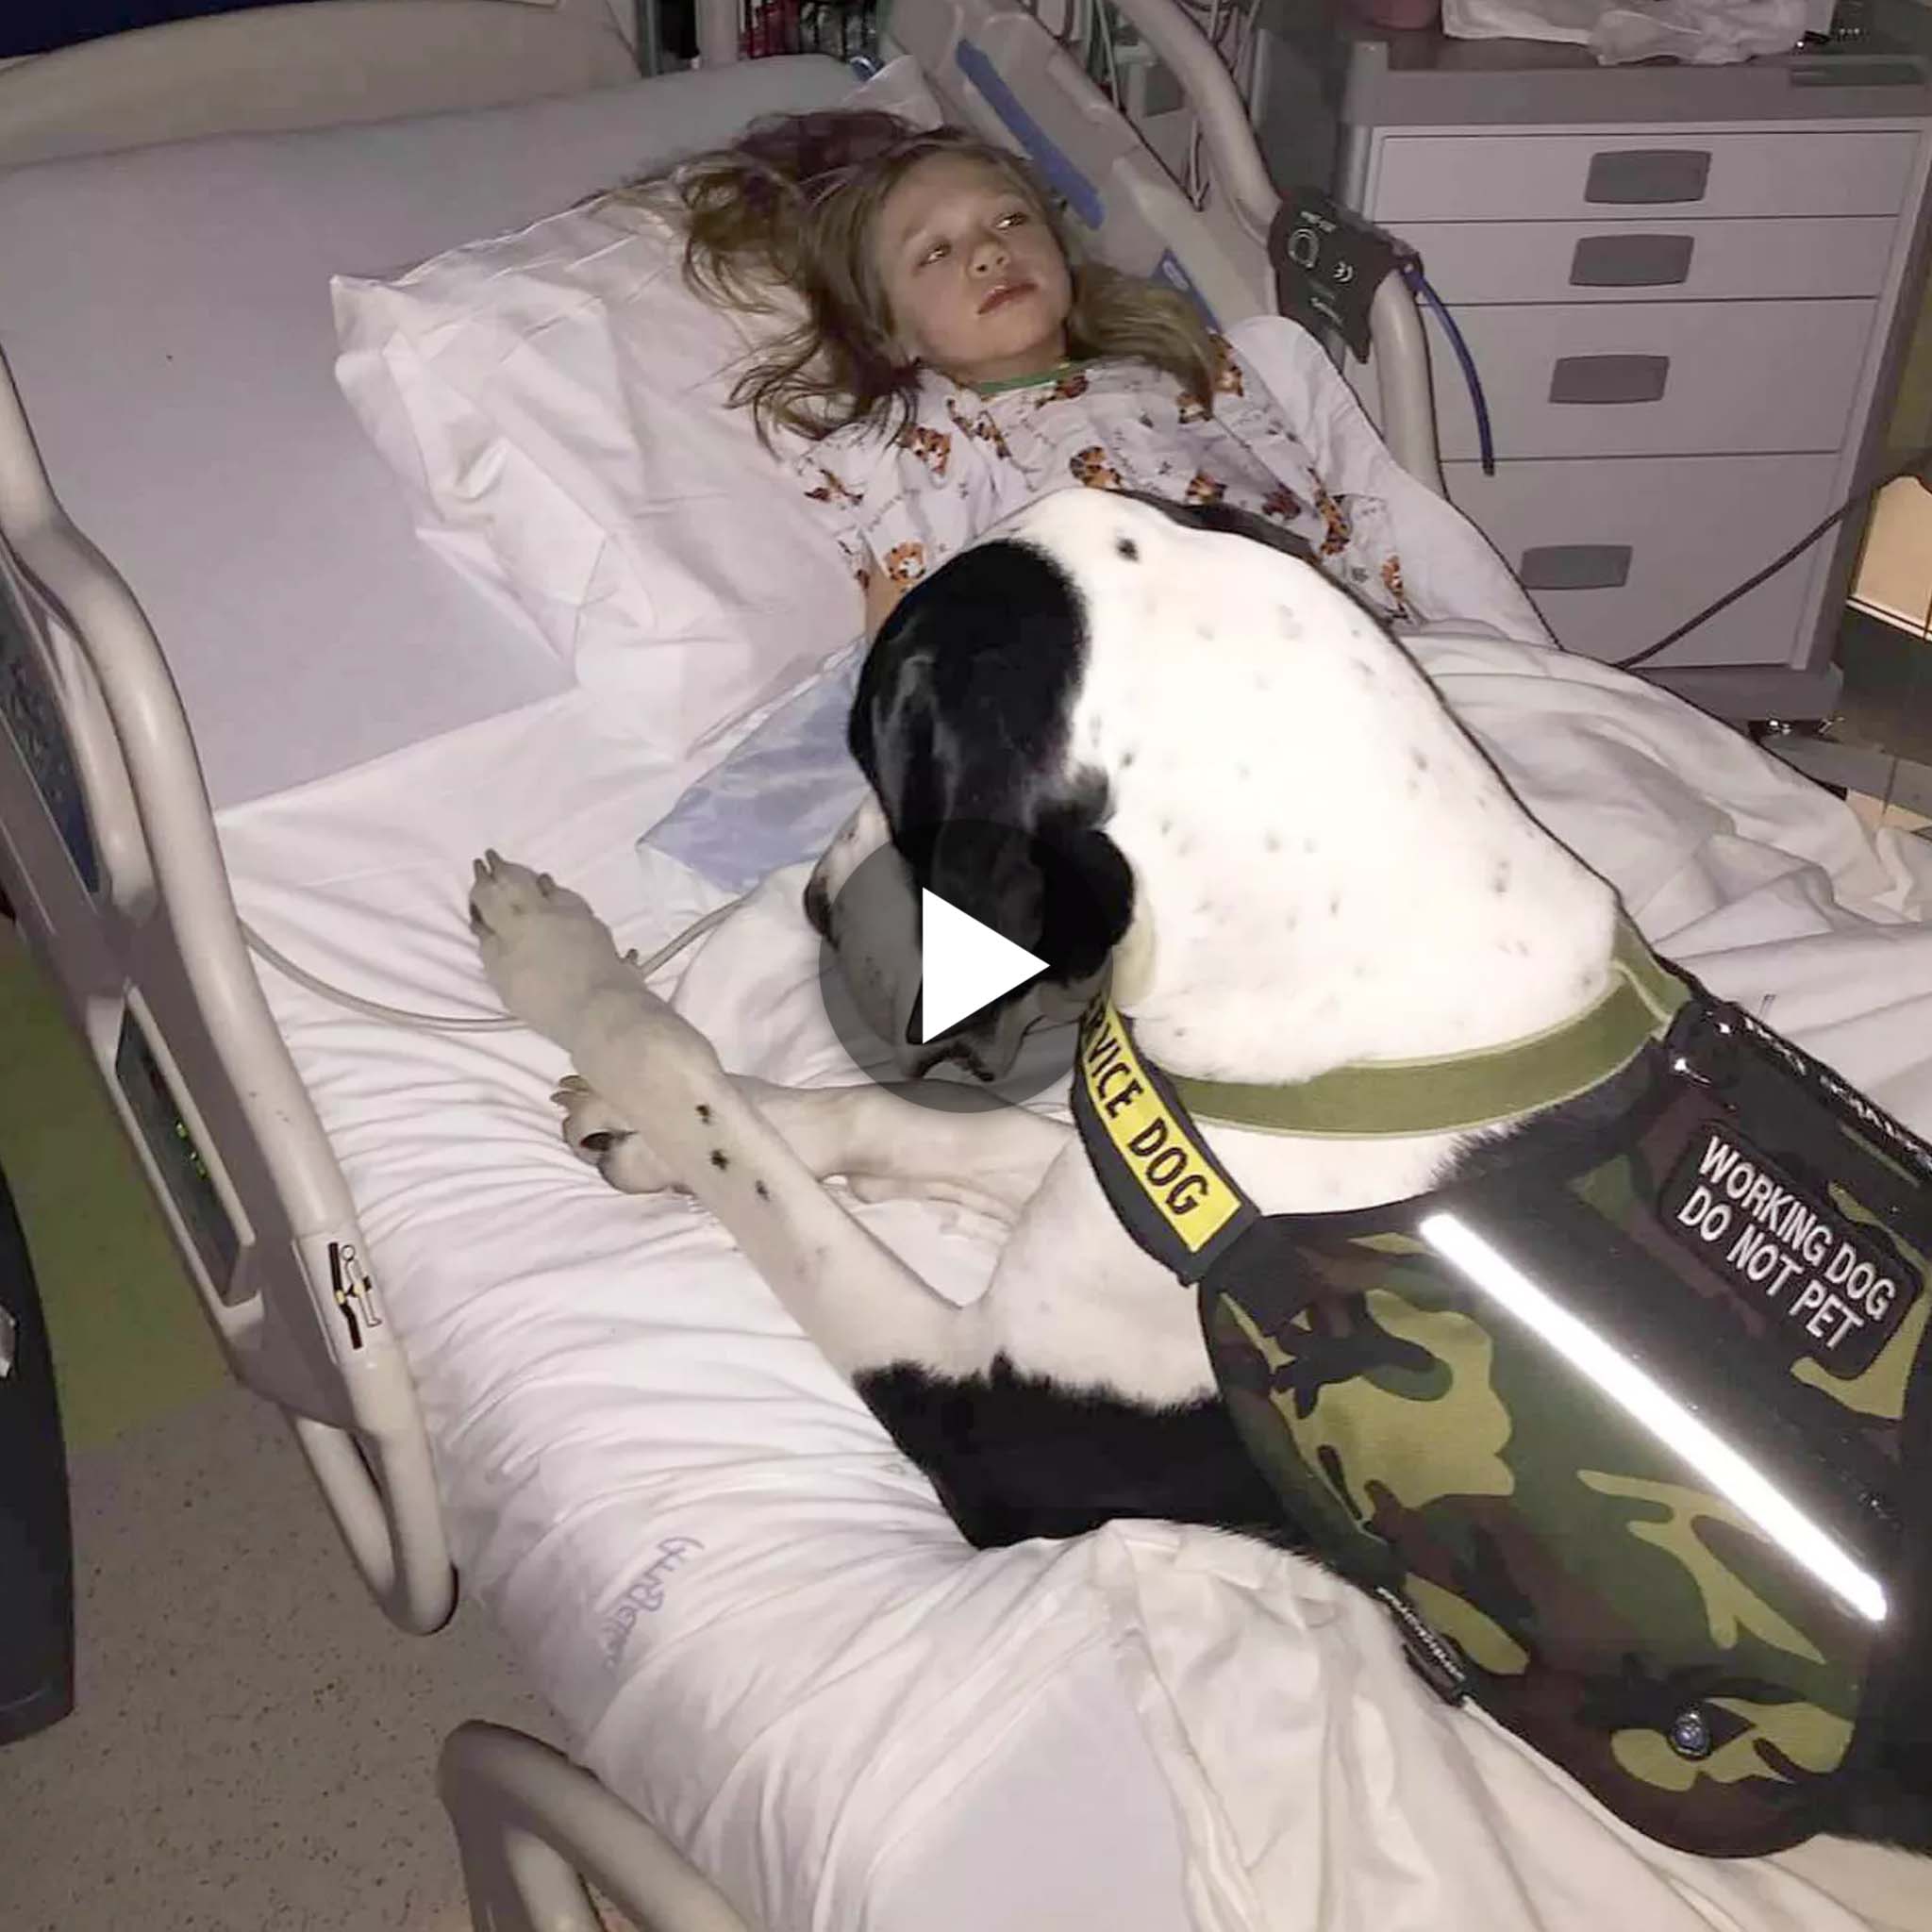 Devoted Guardian: The Heartwarming Story of a Dog Assuming the Role of Protector and Providing Assistance to a Little Girl, Especially in Times When Her Parents Are Away at the Hospital.